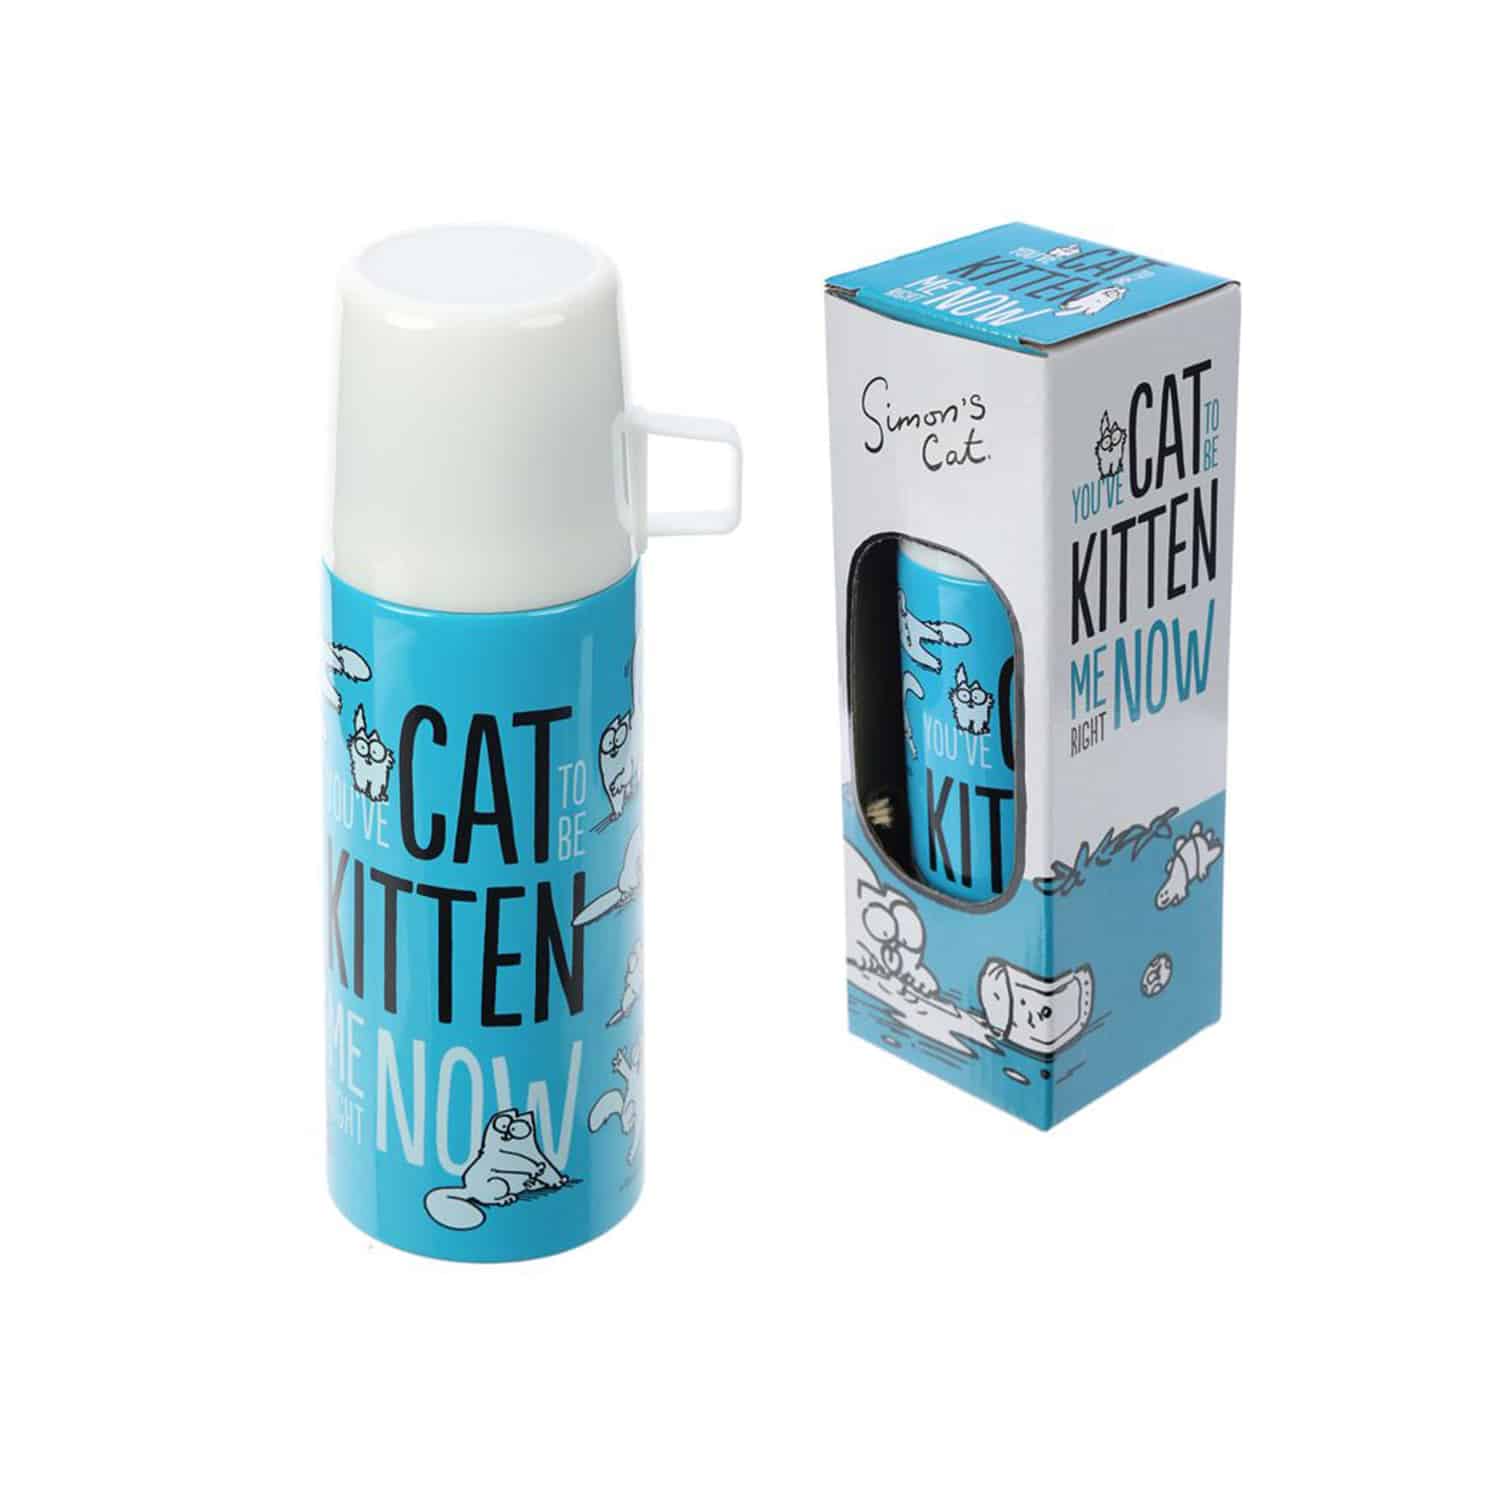 Simon's Cat Stainless Steel Bottle with Cup